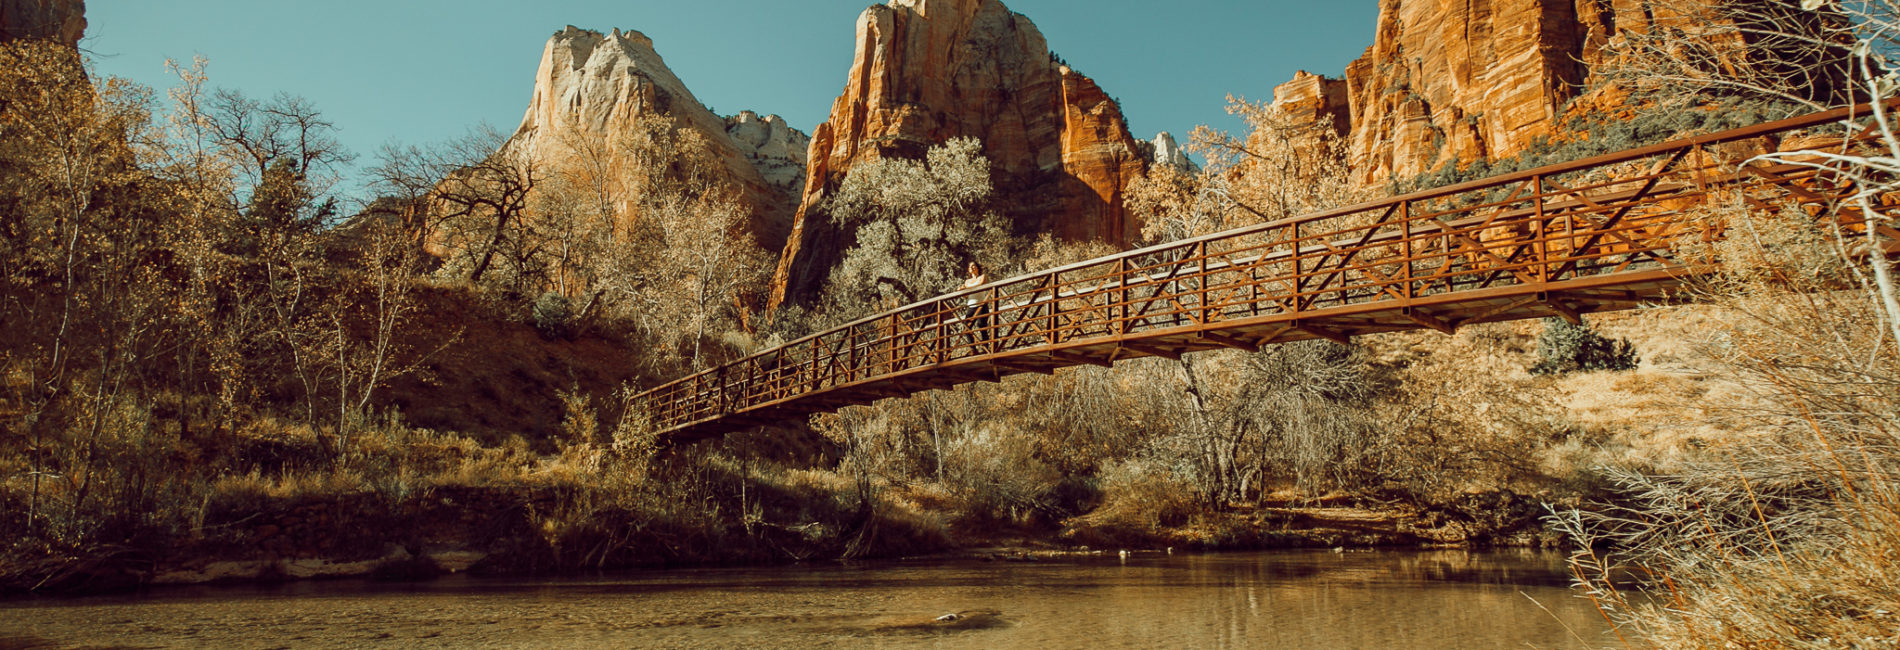 where to stay when visiting Zion National Park